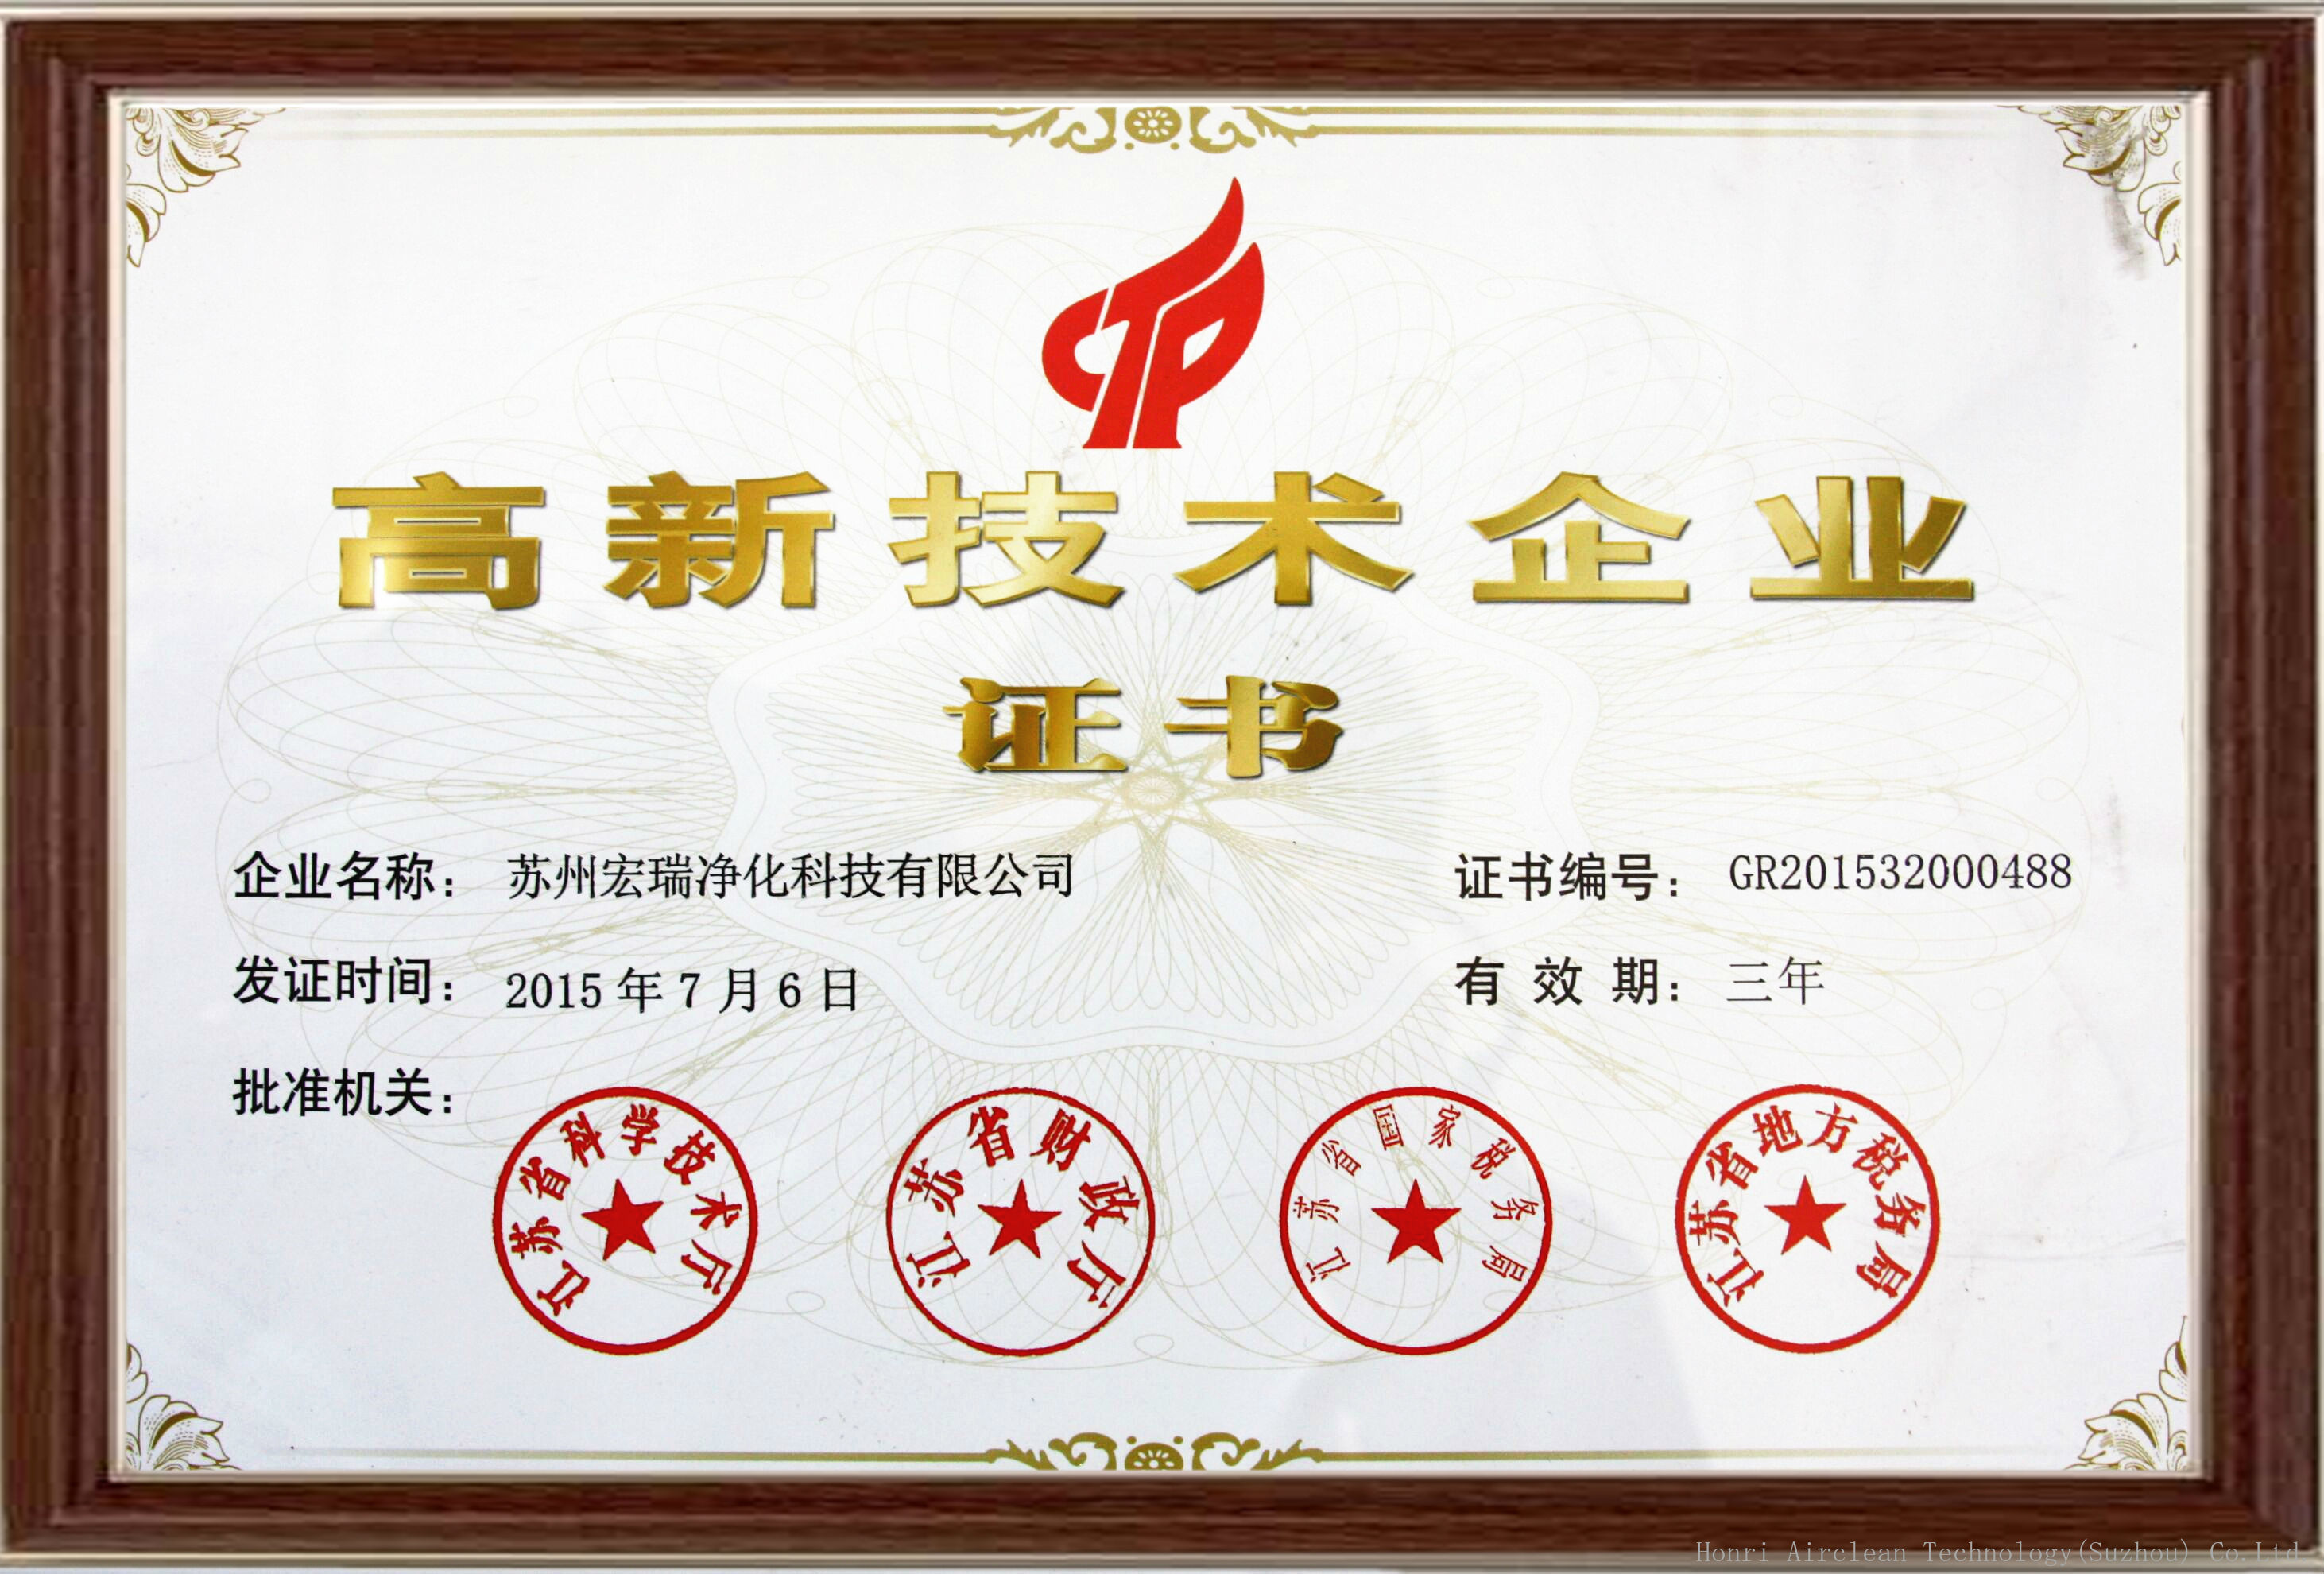 Certificate of High and new technology enterprise